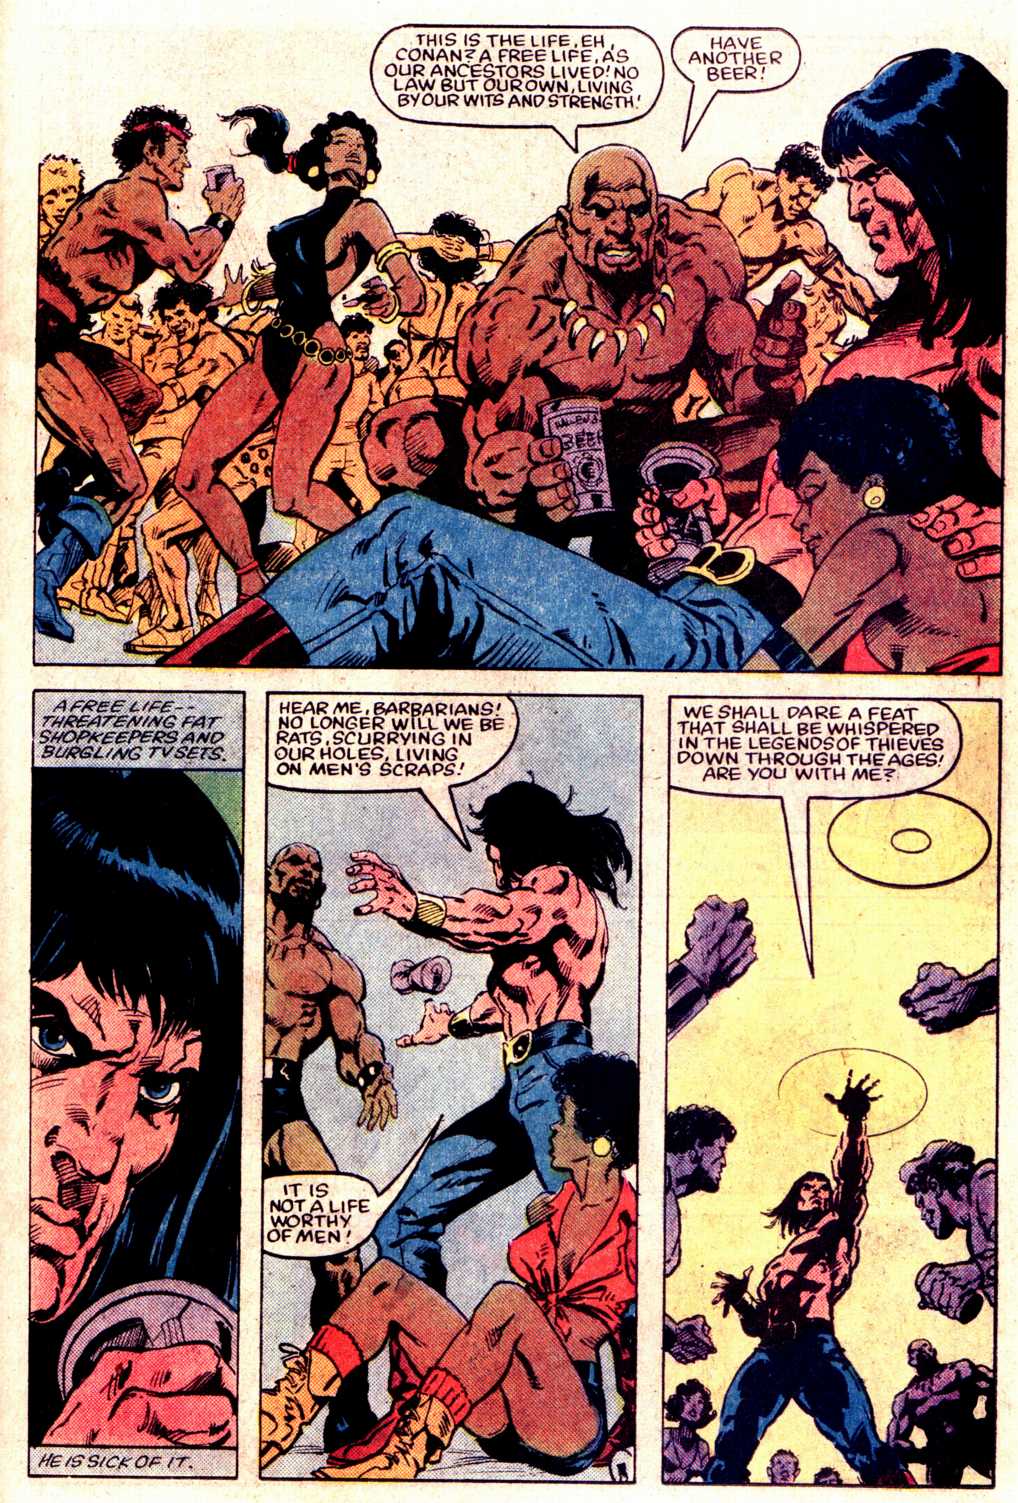 What If? (1977) issue 43 - Conan the Barbarian were stranded in the 20th century - Page 18